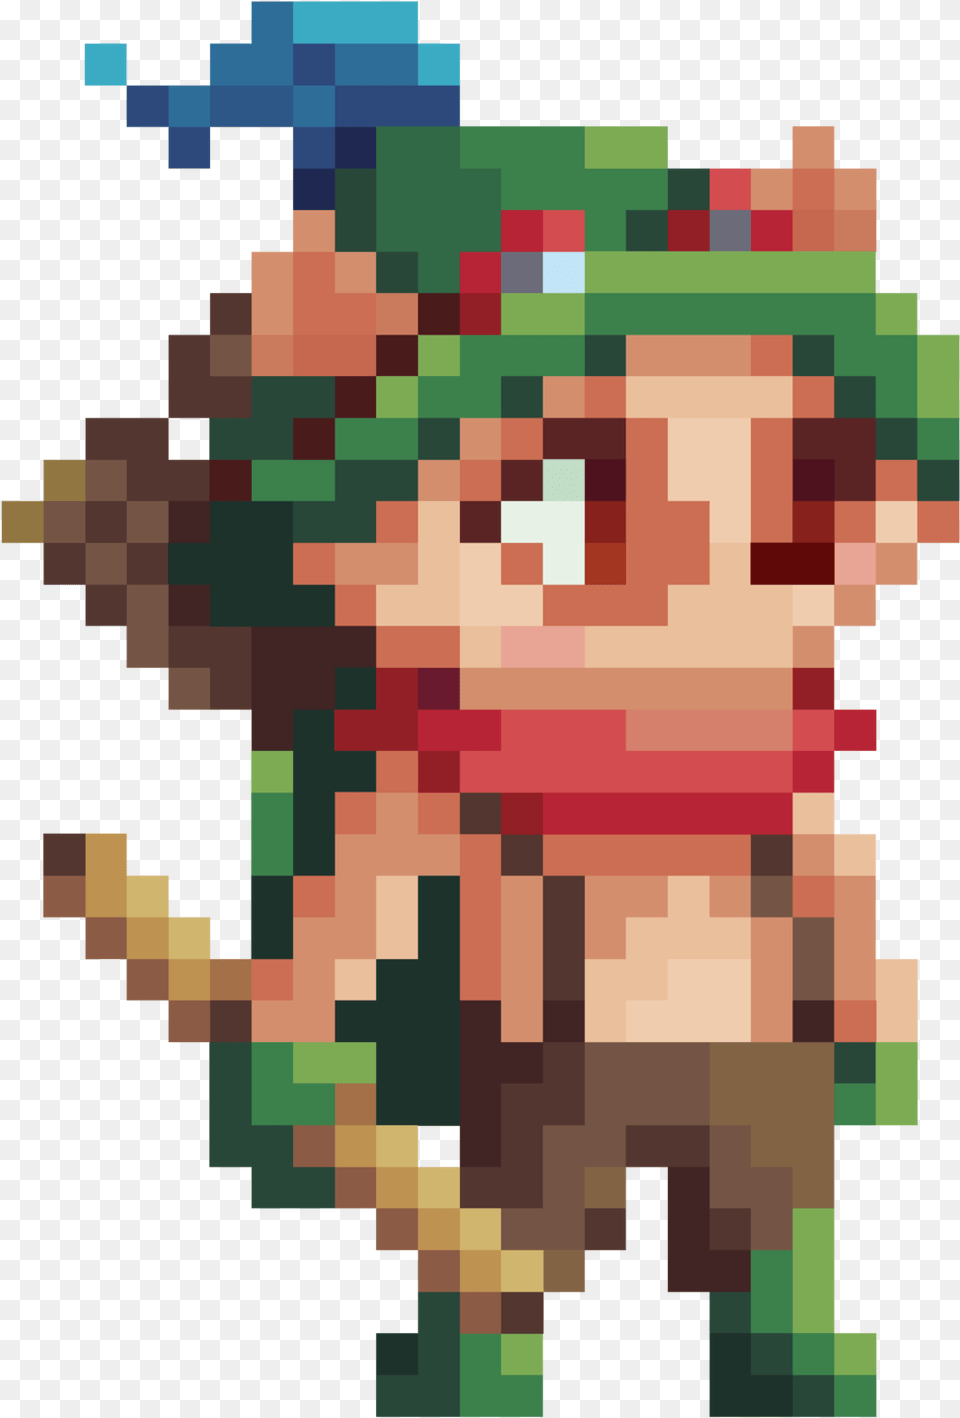 Download 8 Bit Teemo Hd Water, Art, Chess, Game, Graphics Free Transparent Png